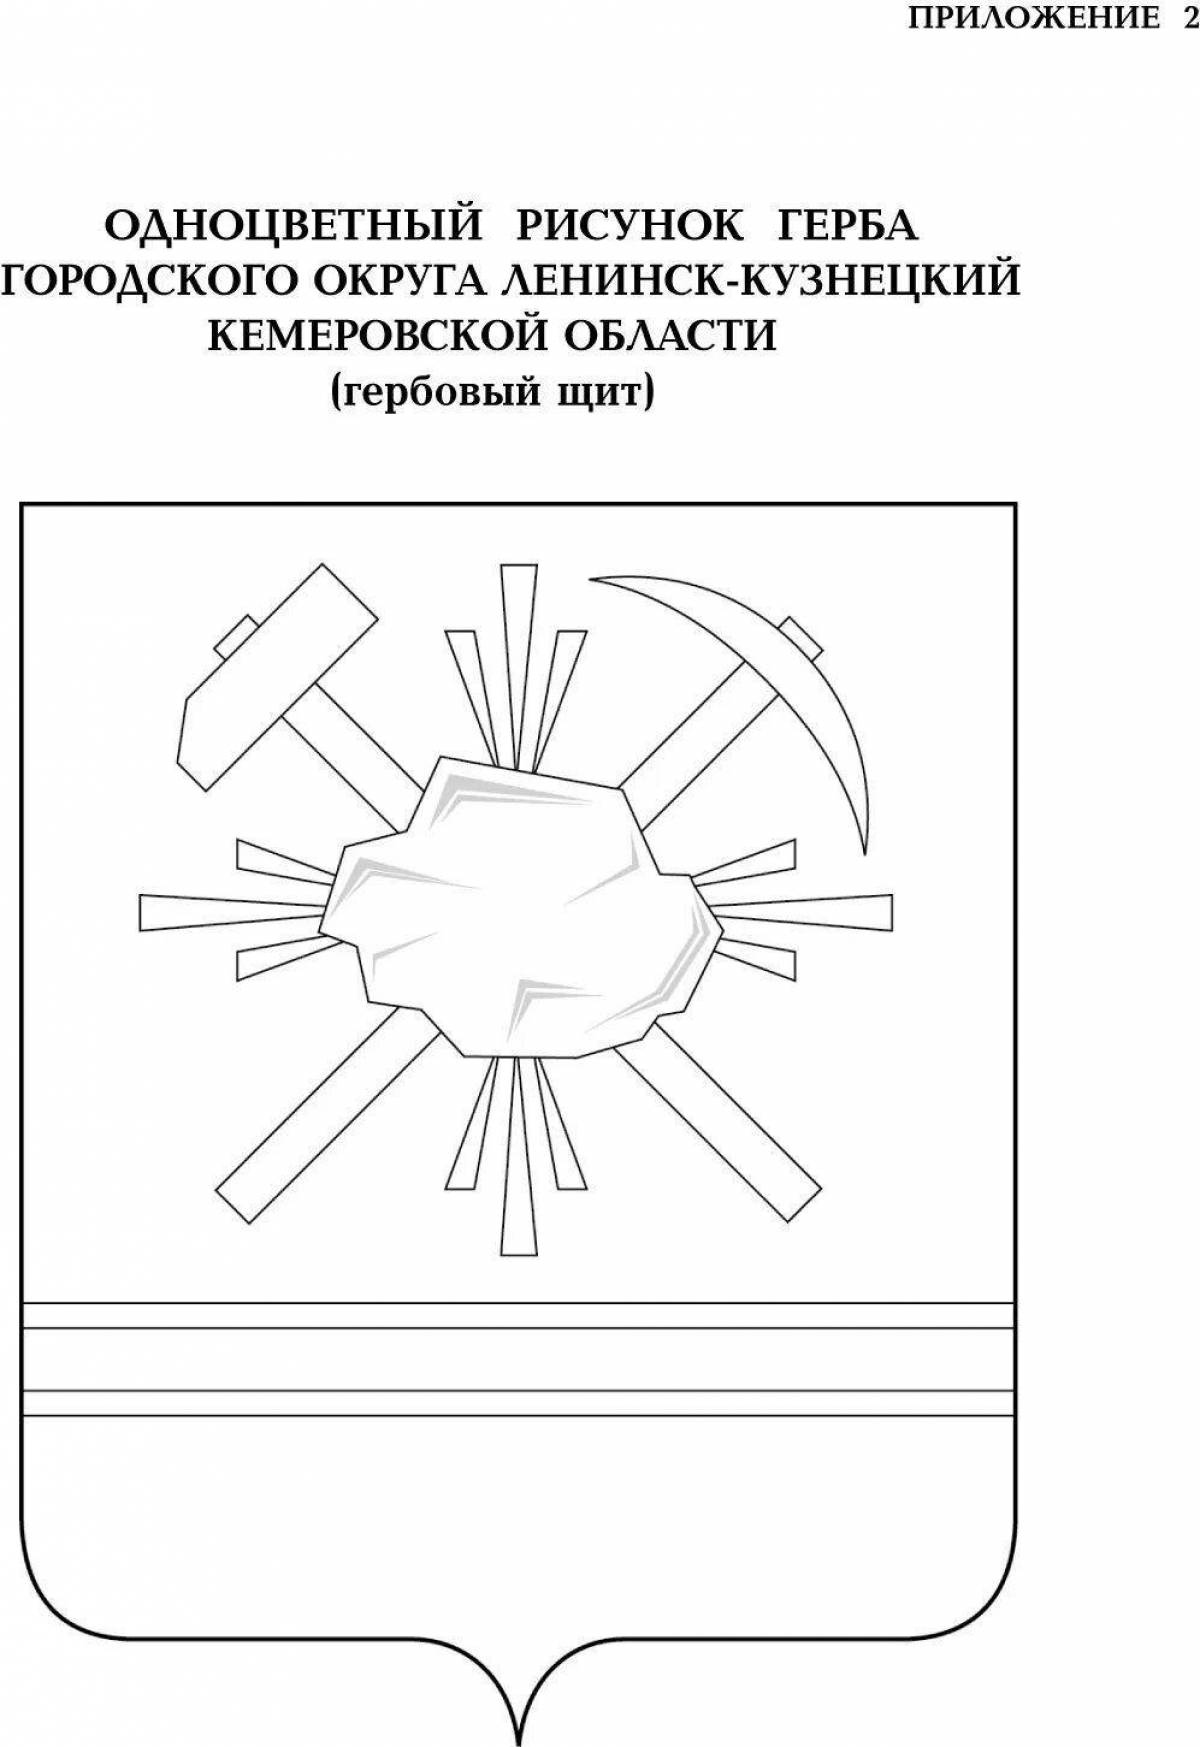 Dazzling coat of arms of Kuzbass for children